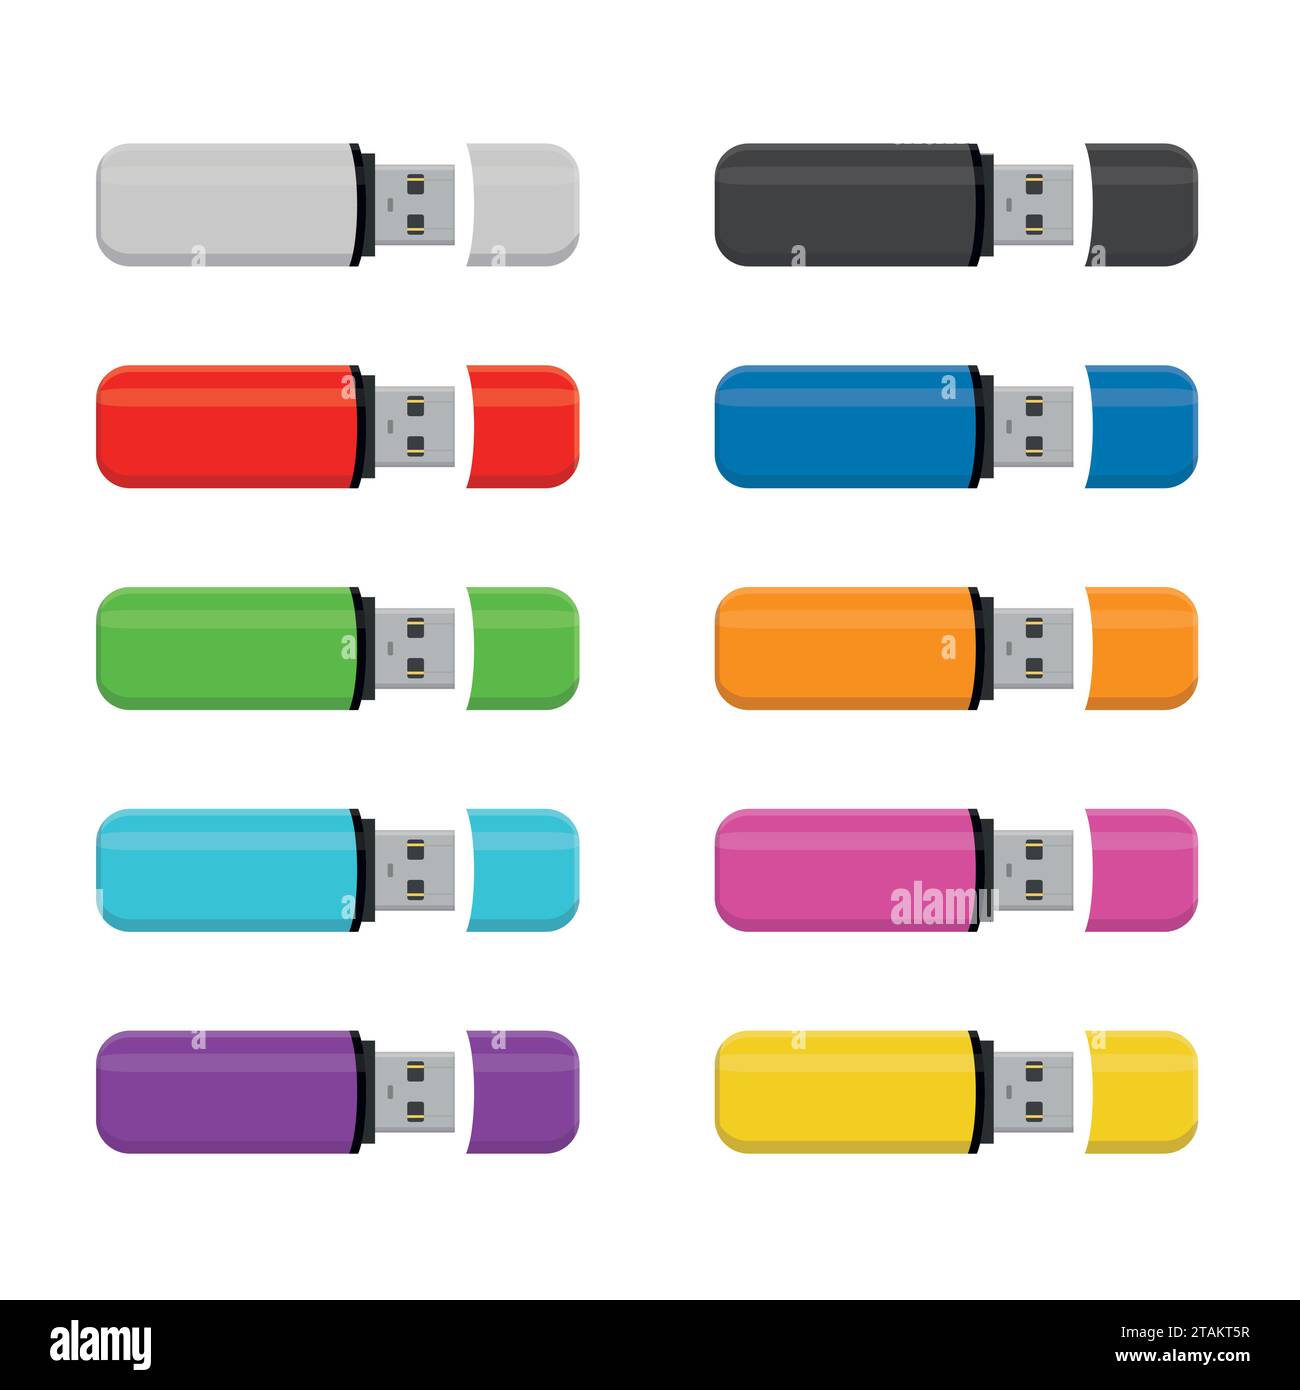 Set colored Flash drive USB memory sticks isolated on white background in flat style. Stock Vector